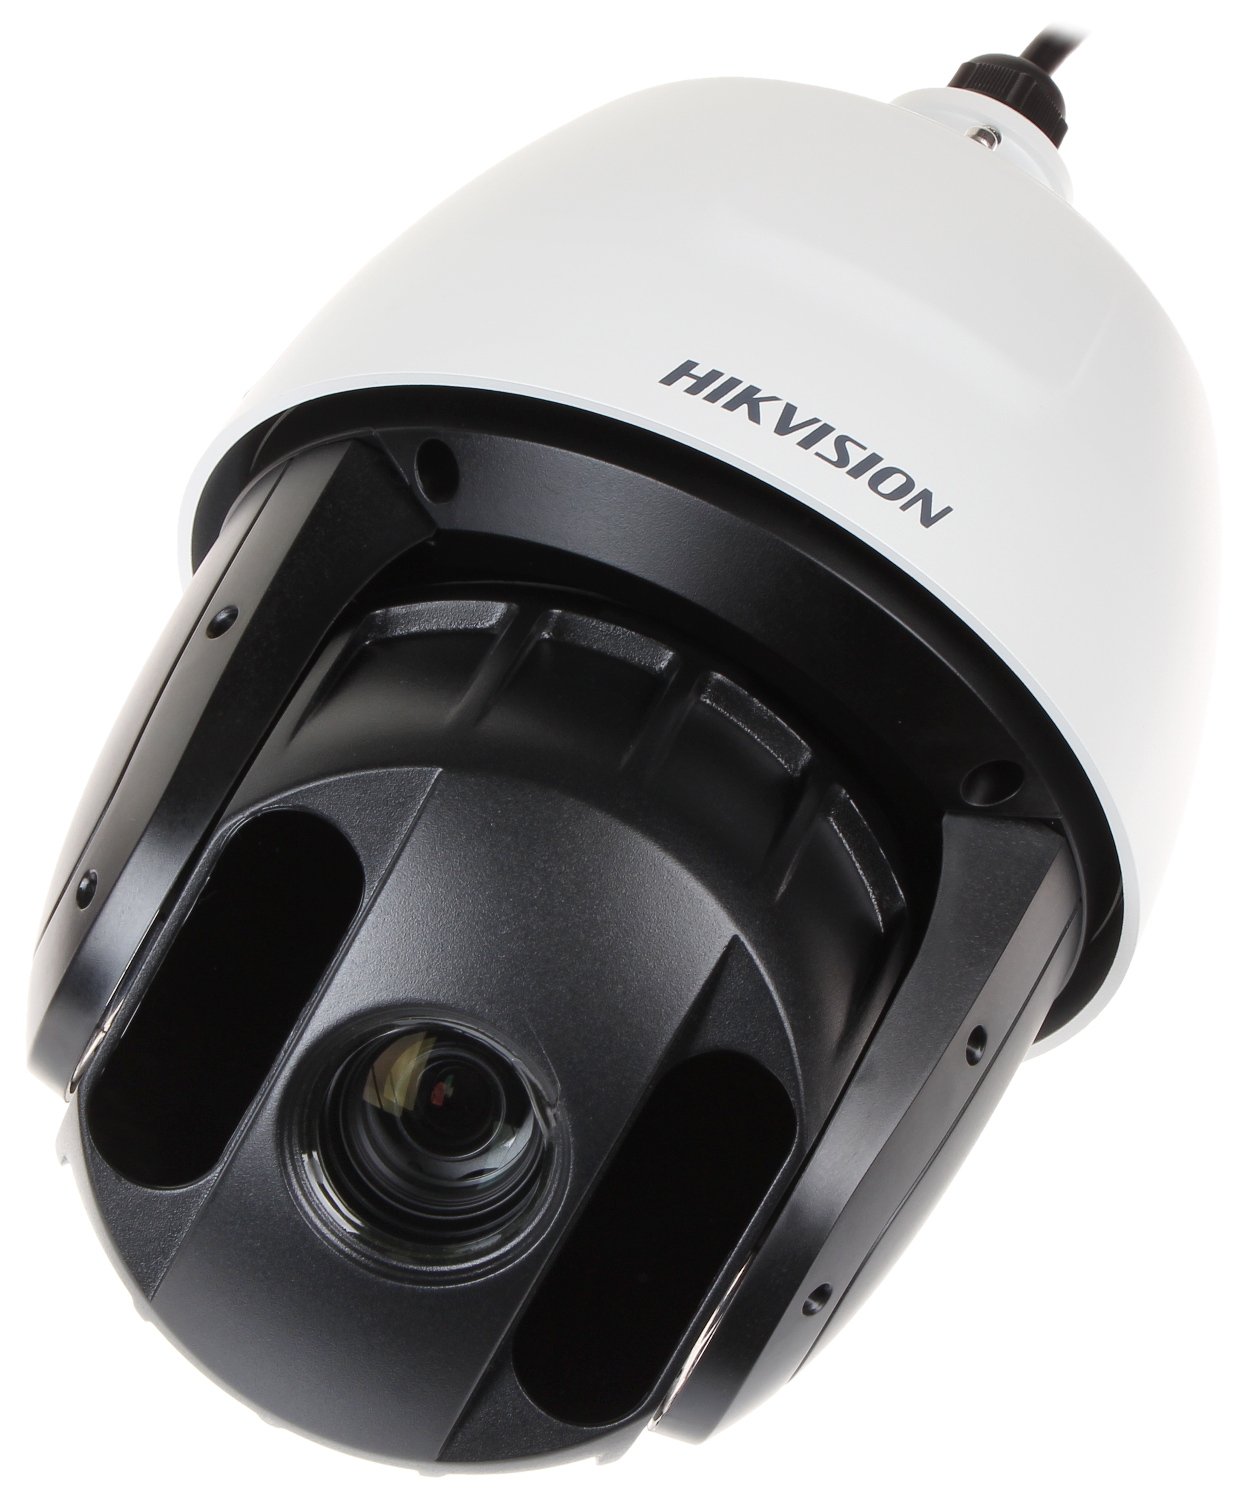 IP SPEED DOME CAMERA OUTDOOR DS-2DE5225IW-AE - 1080p 4... - With an  illuminator range above 100 m - Delta